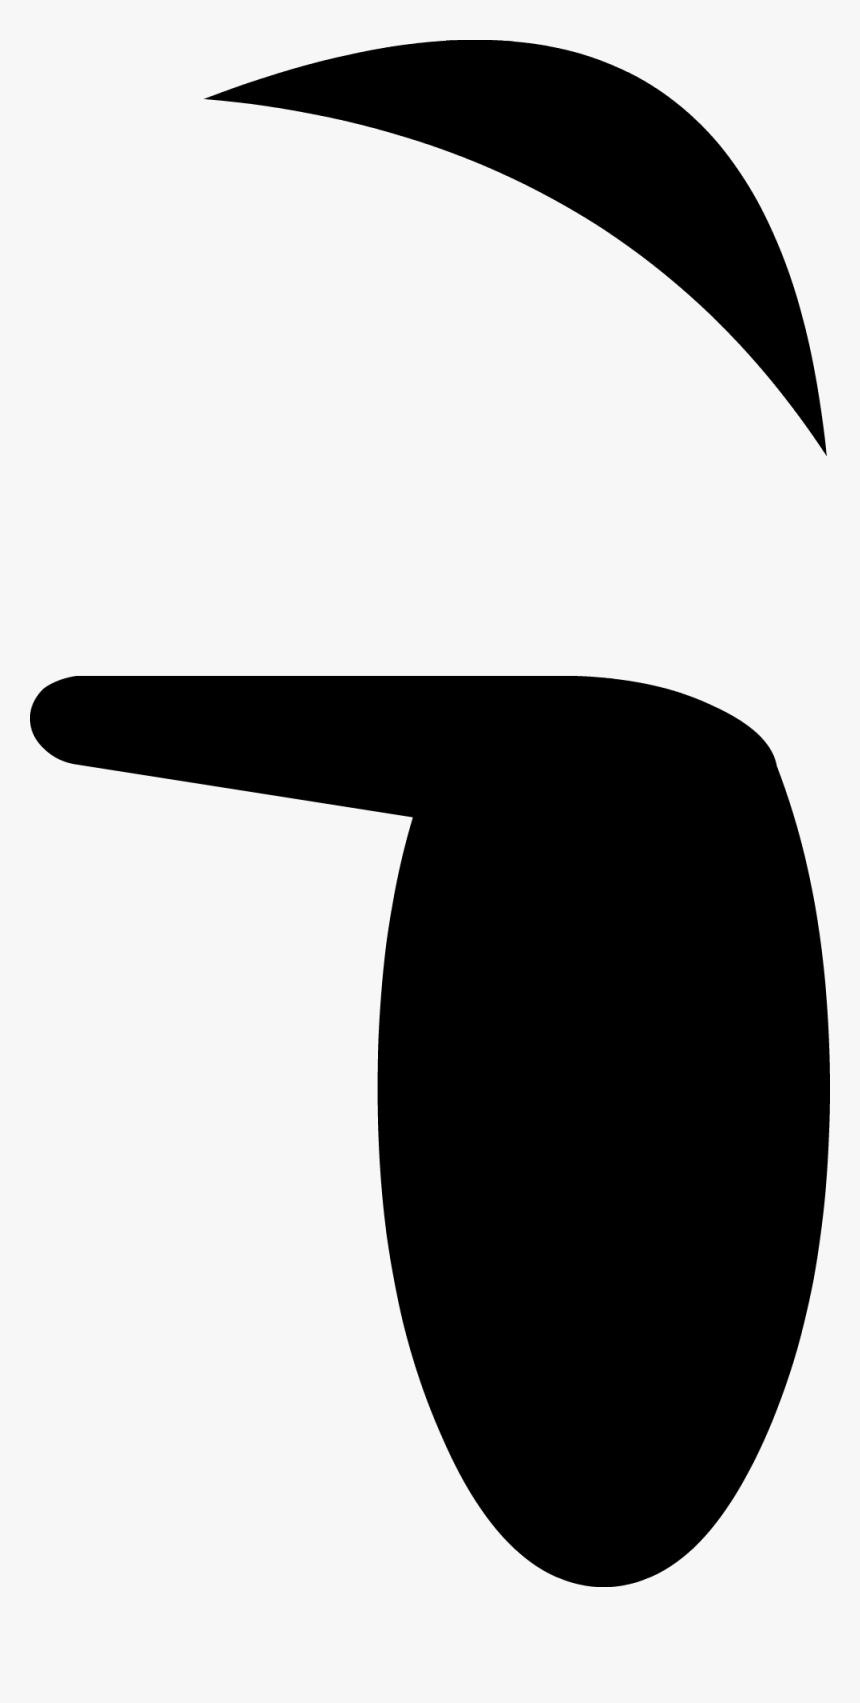 Image Low Eye With Raised Eyebrow Png - Bfdi Eye Low, Transparent Png, Free Download